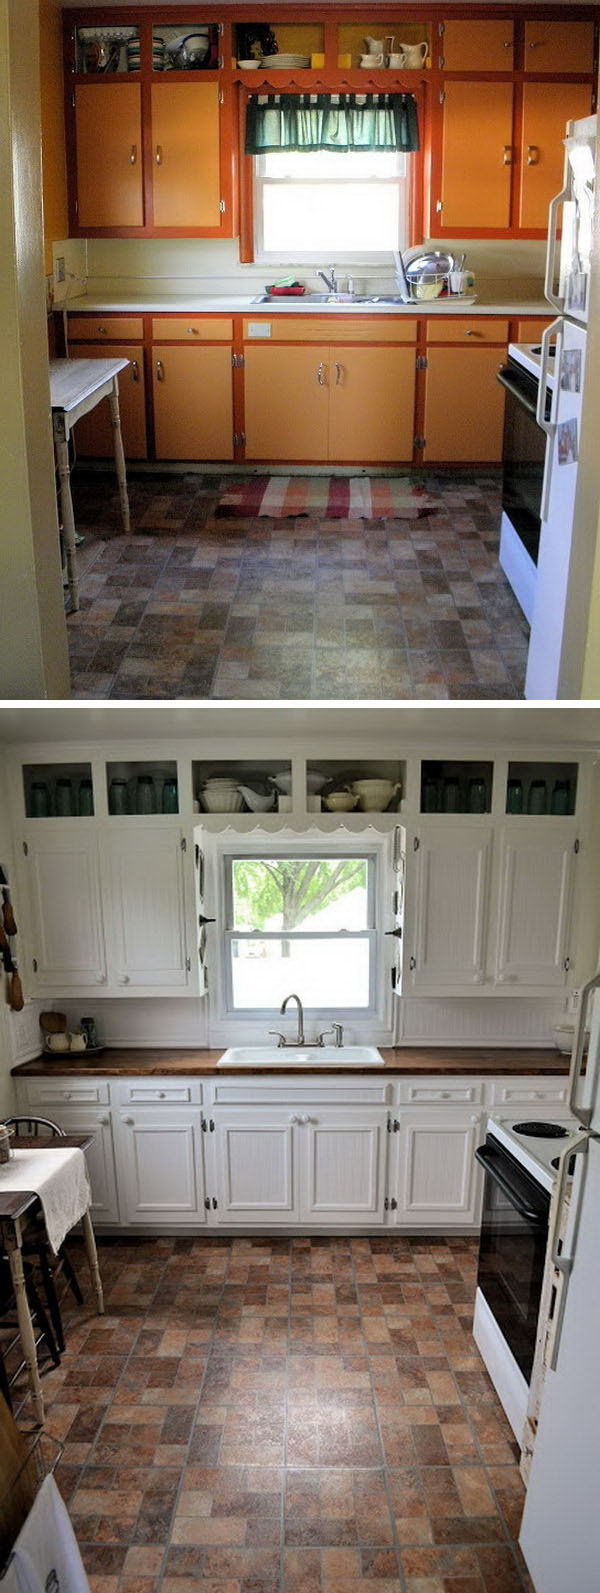 Wow, what a transformation. It is light, bright and very charming. I think it's great that they replaced the cabinet cladding and replaced wood worktops, giving a worm and a rustic look that goes very well with the tiles. The ugly outdated kitchen is now pretty stylish with minimal conversion. See how it works 